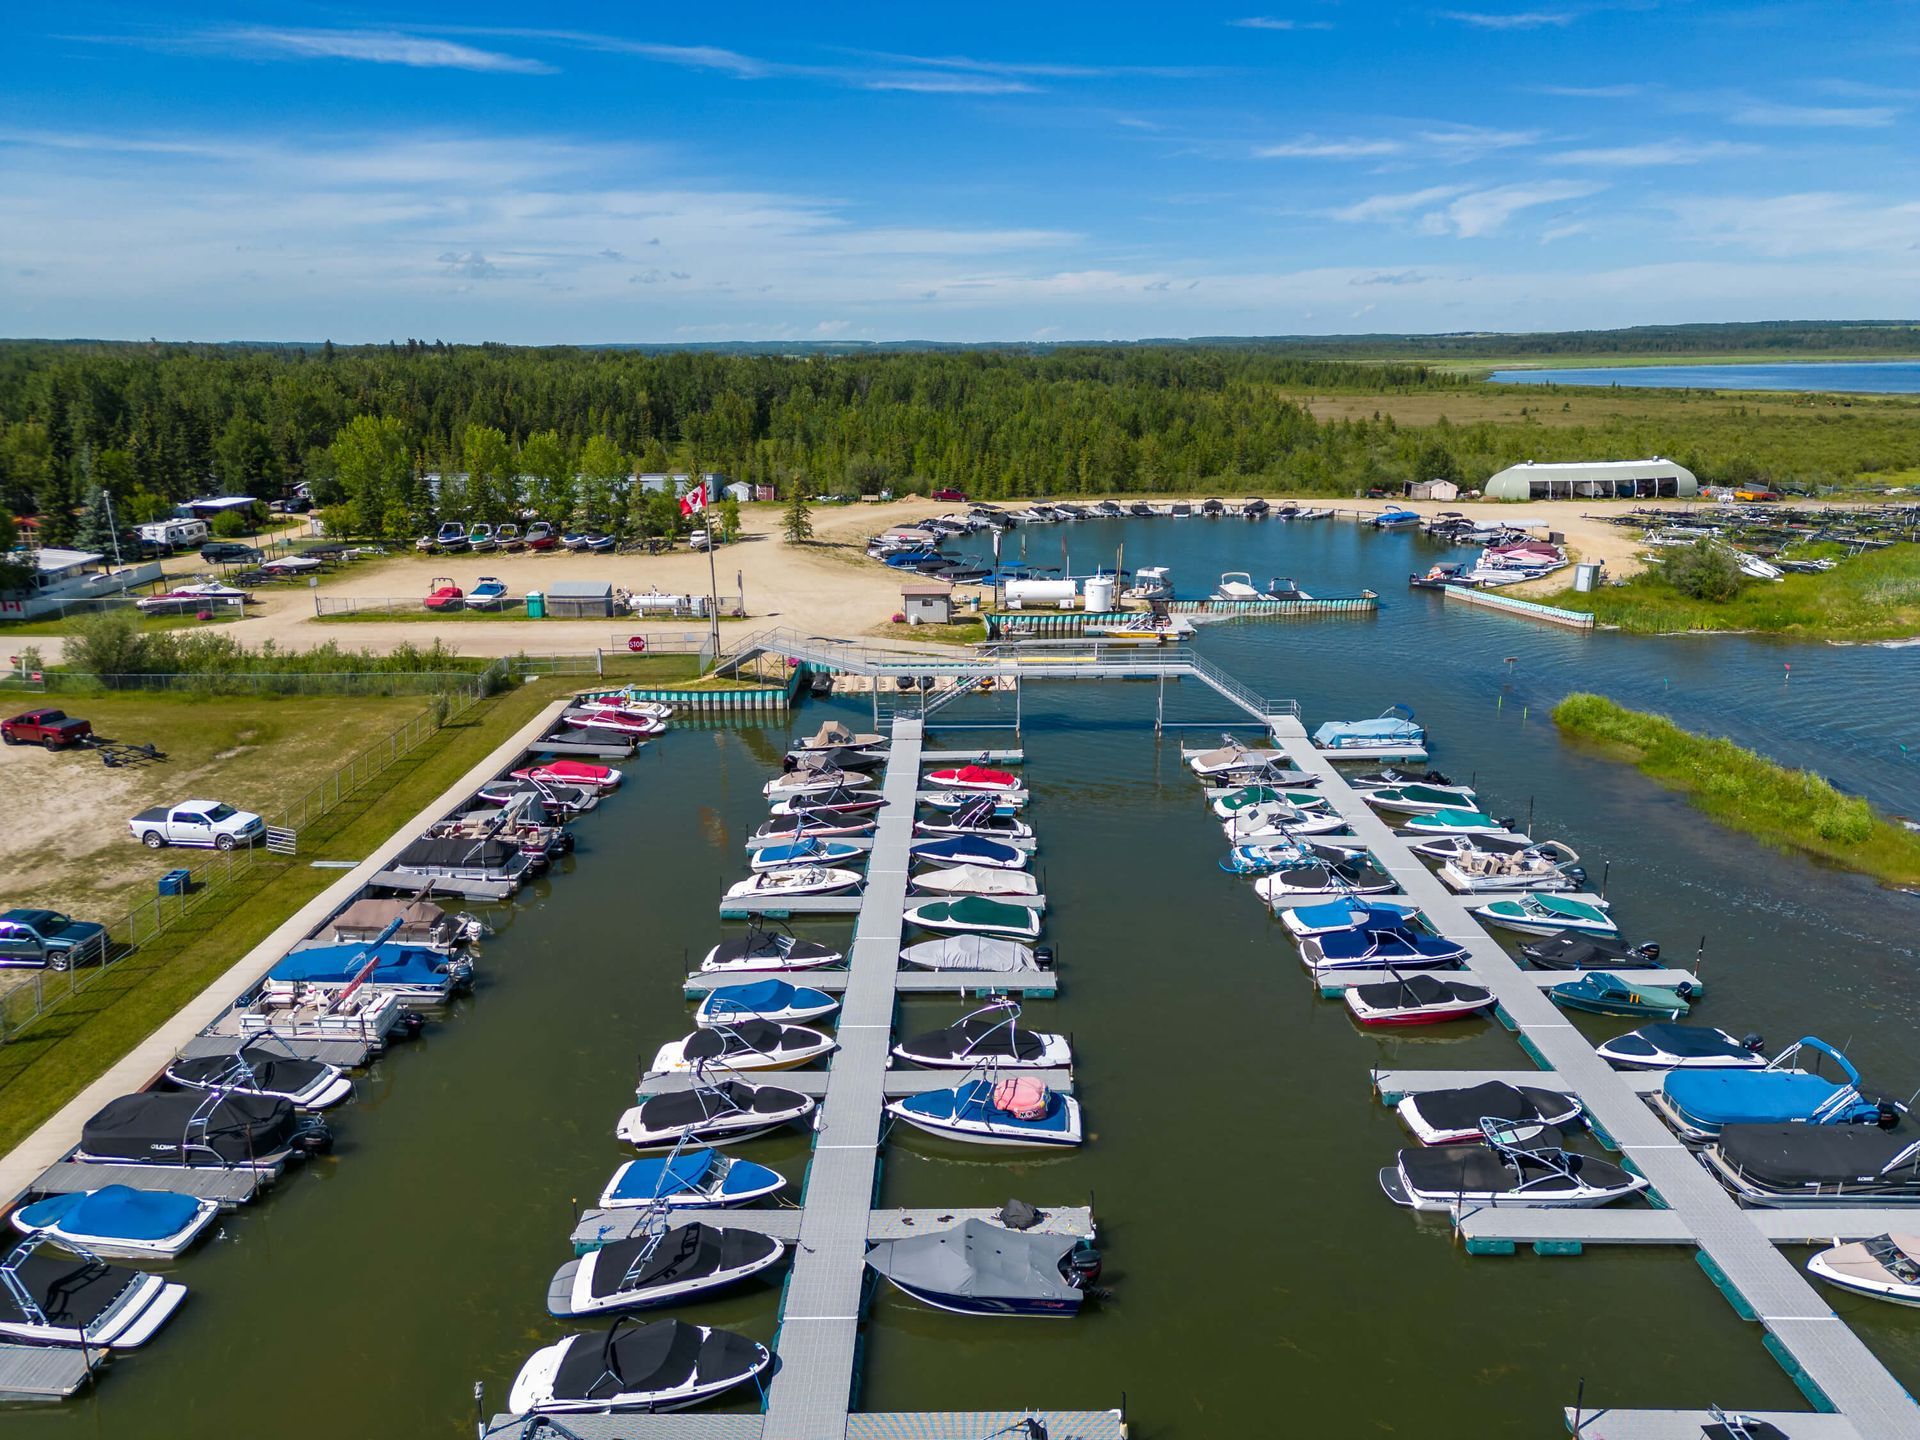 Boating dock of Hilltop Hideaway, a Rimbey Gull Lake short-term rental hosted by Aisling Baile Property Management.